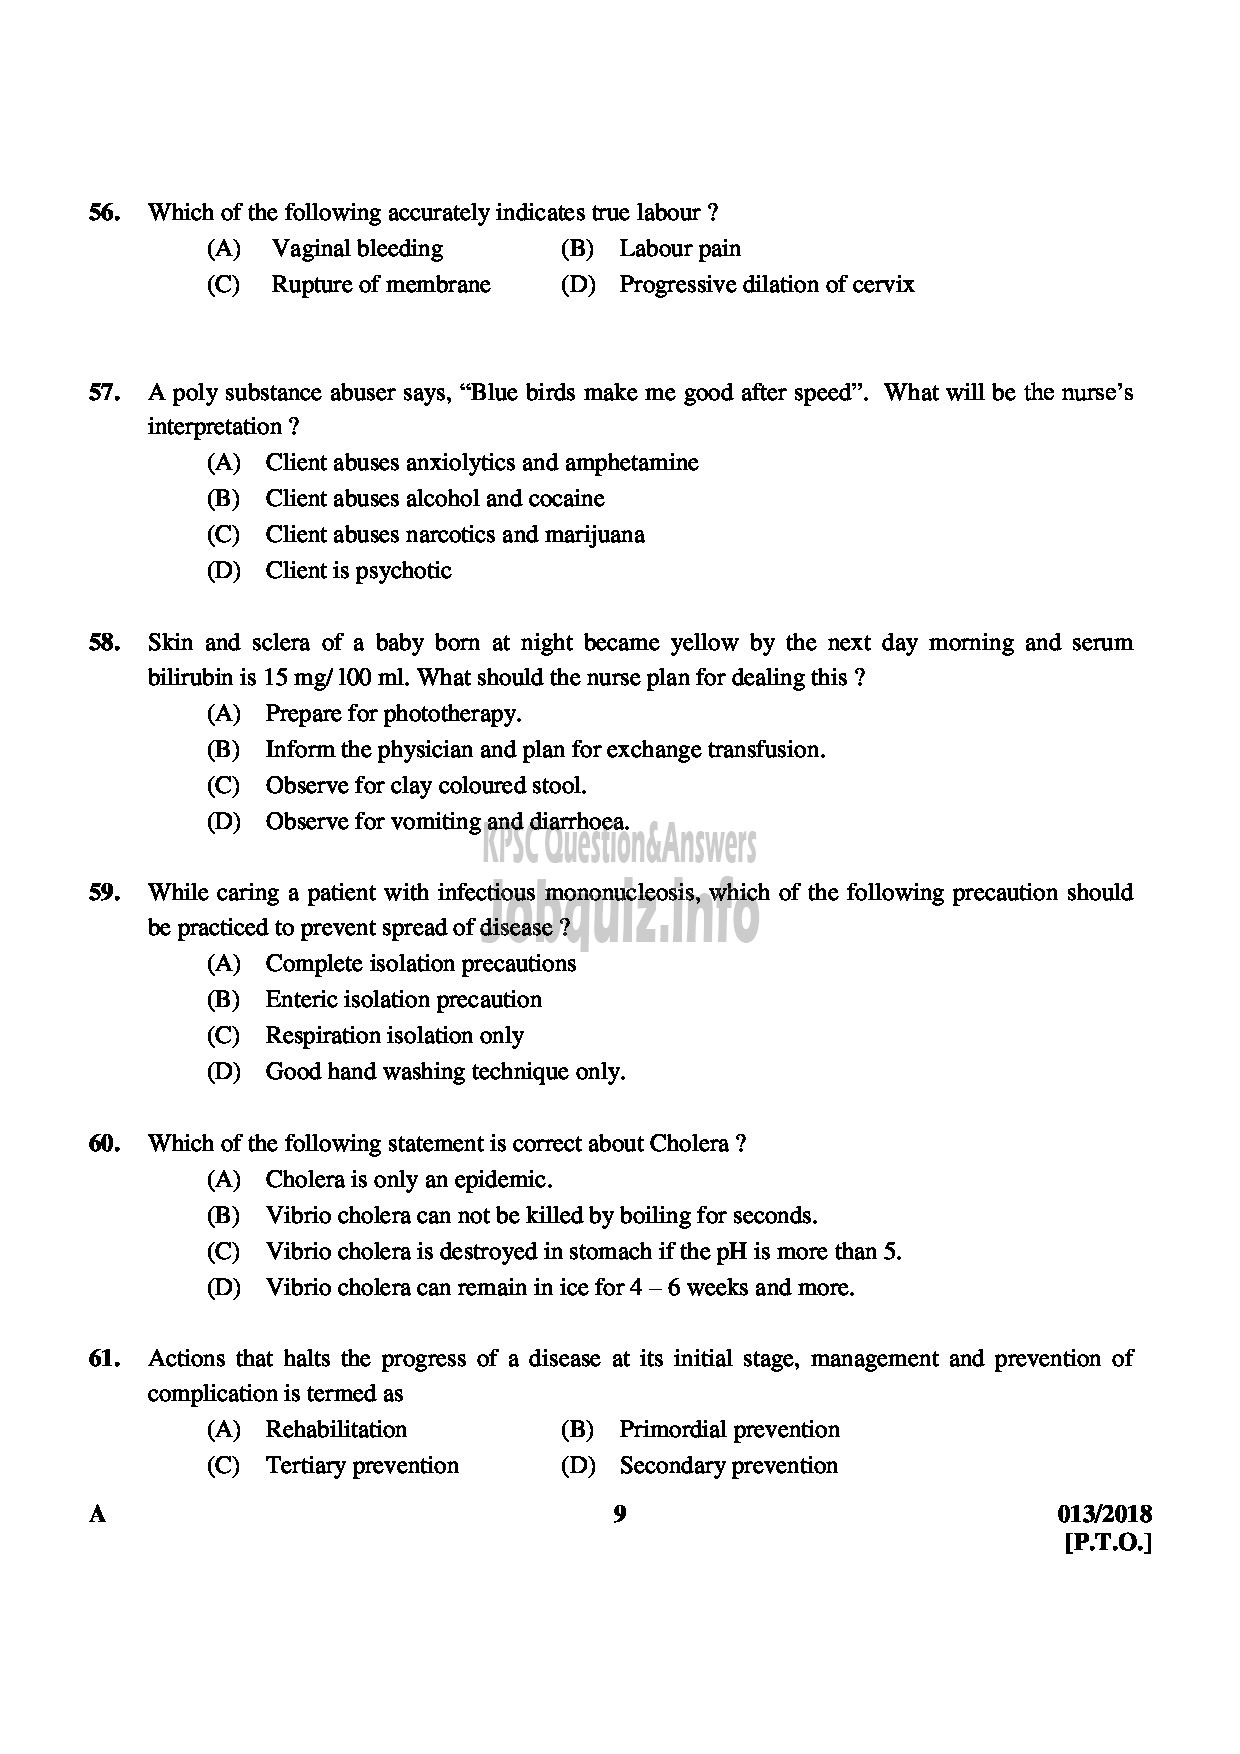 Kerala PSC Question Paper - VOCATIONAL INSTRUCTOR IN DOMESTIC NURSING VHSE-9